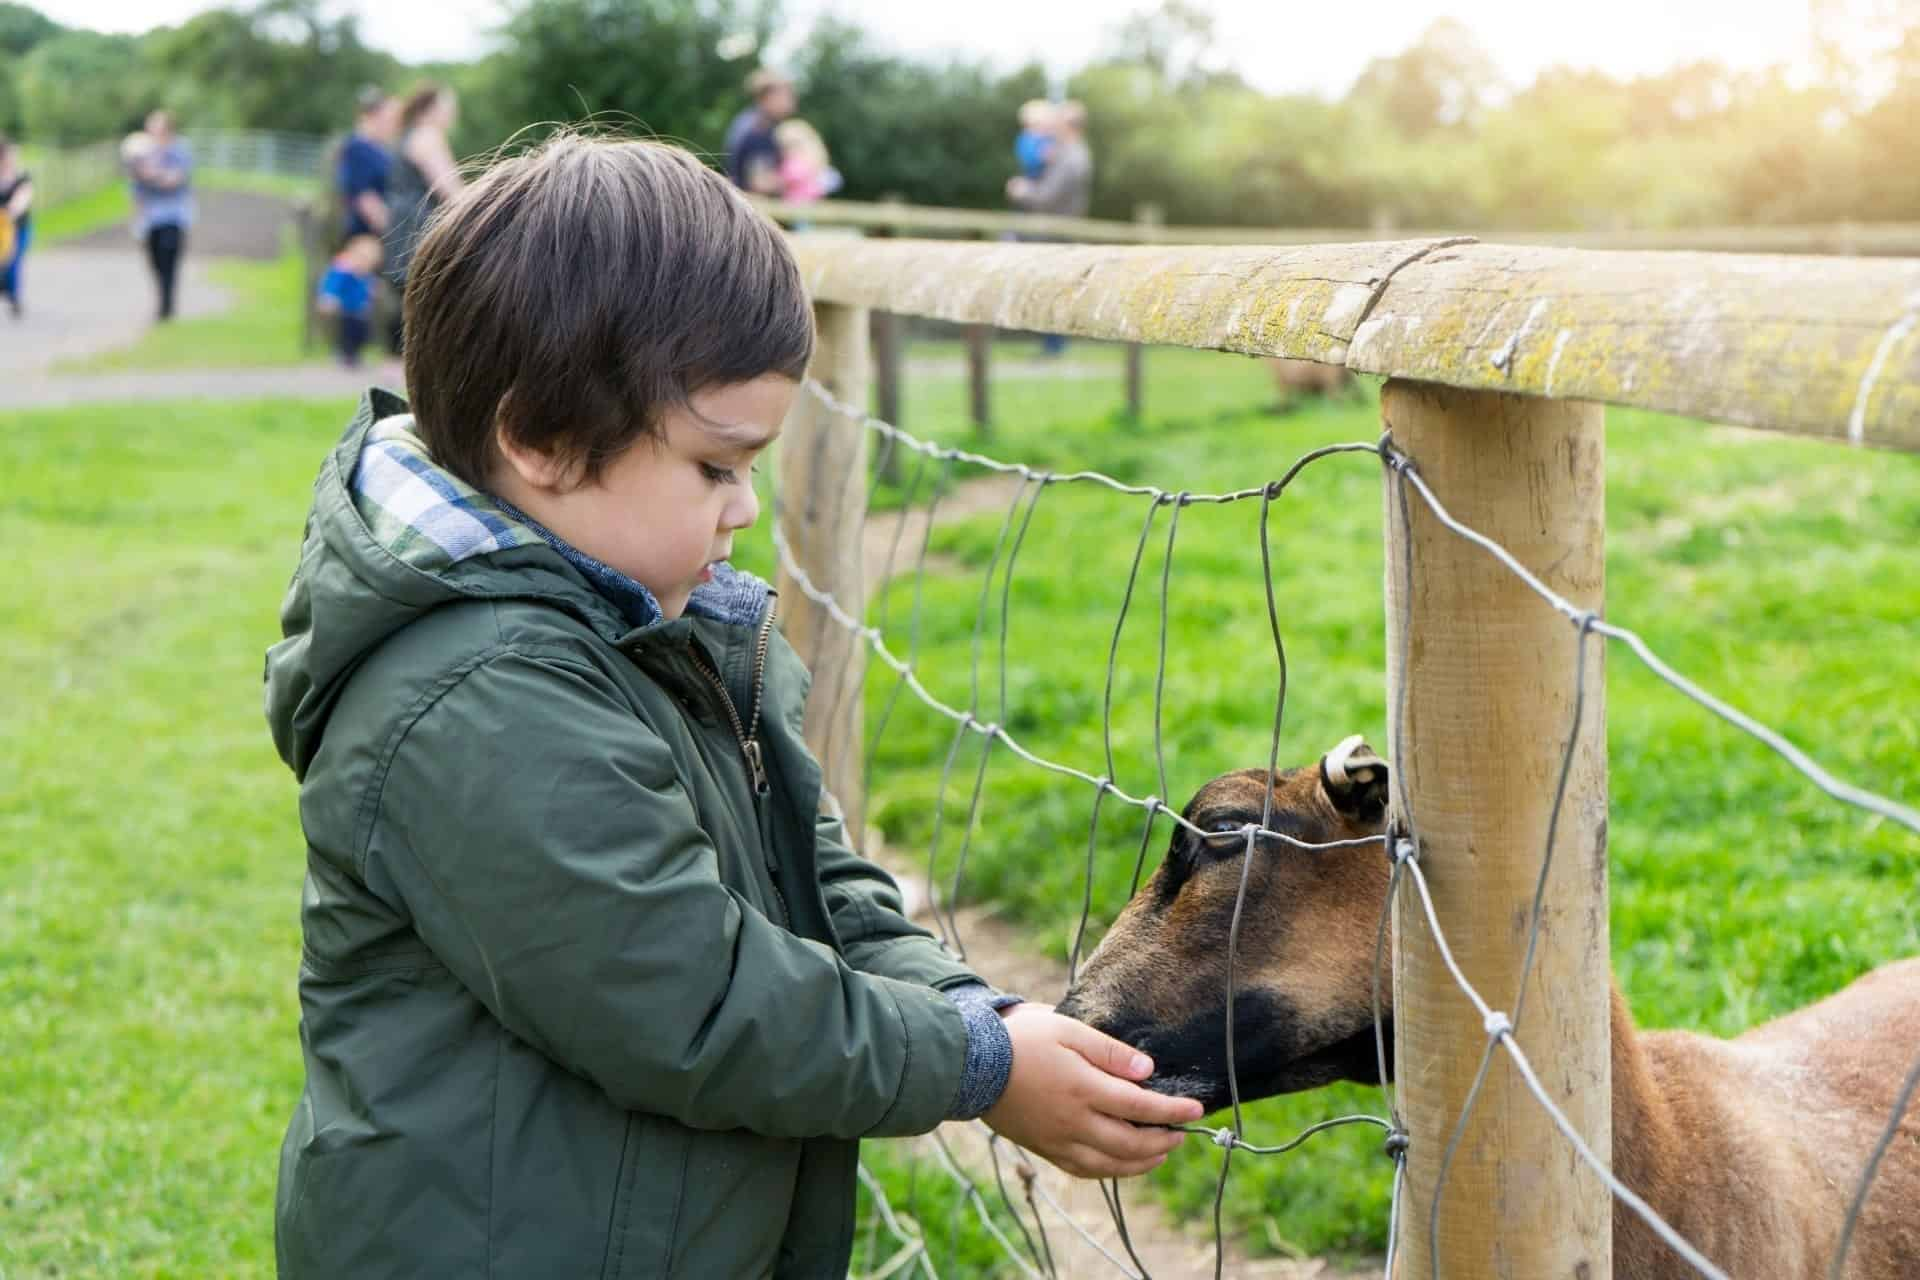 toddler feeding a goat at the farm in wales